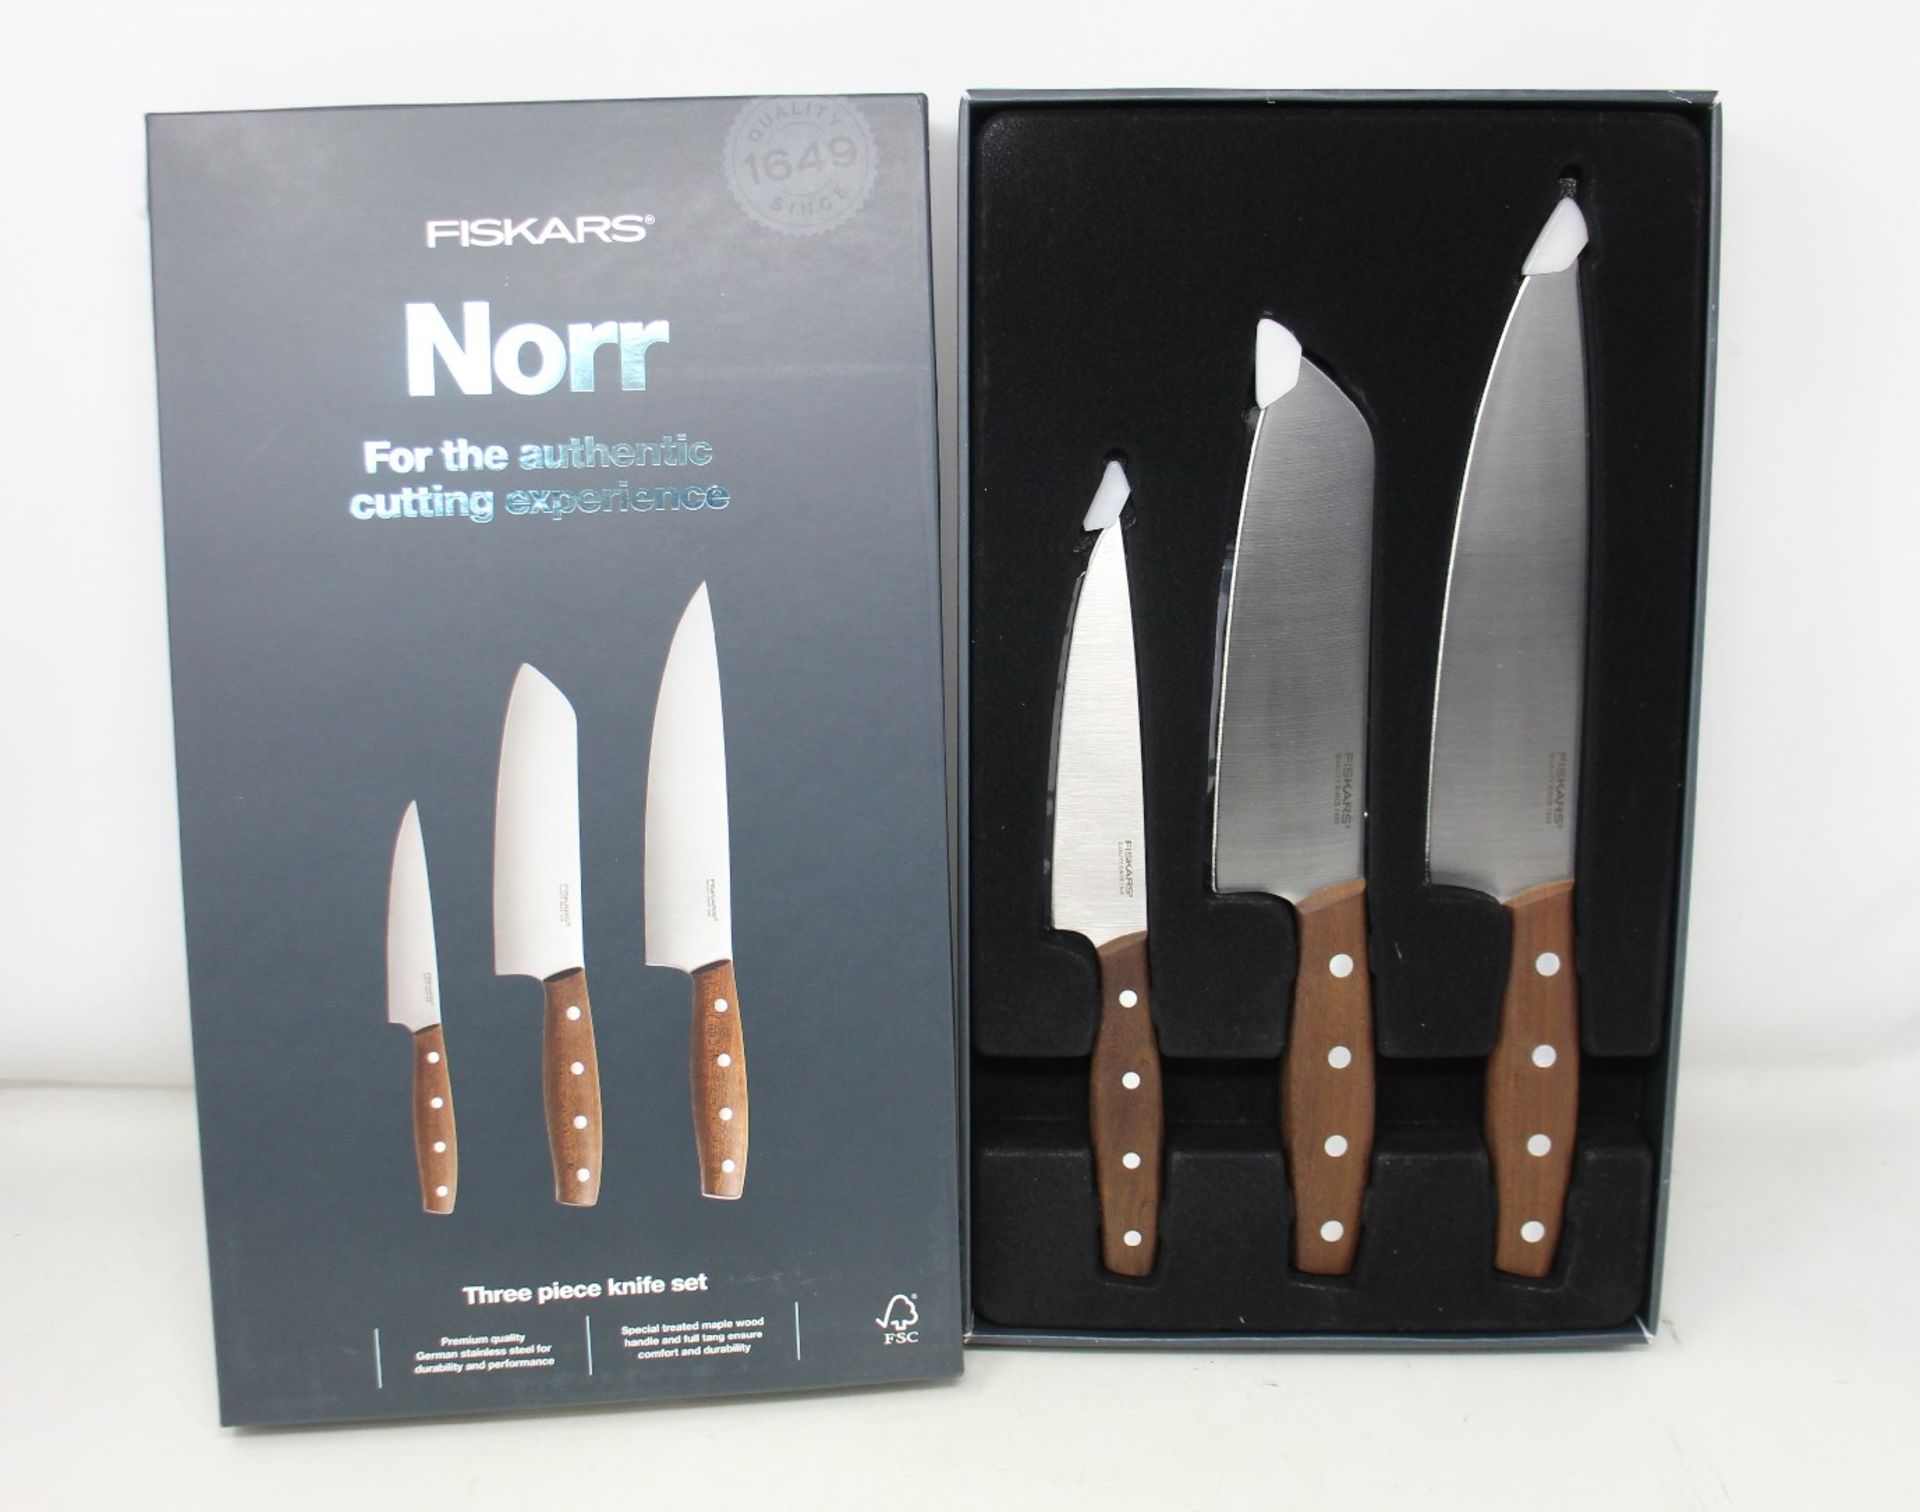 Three Fiskars Norr three piece knife sets (Over 18s only).